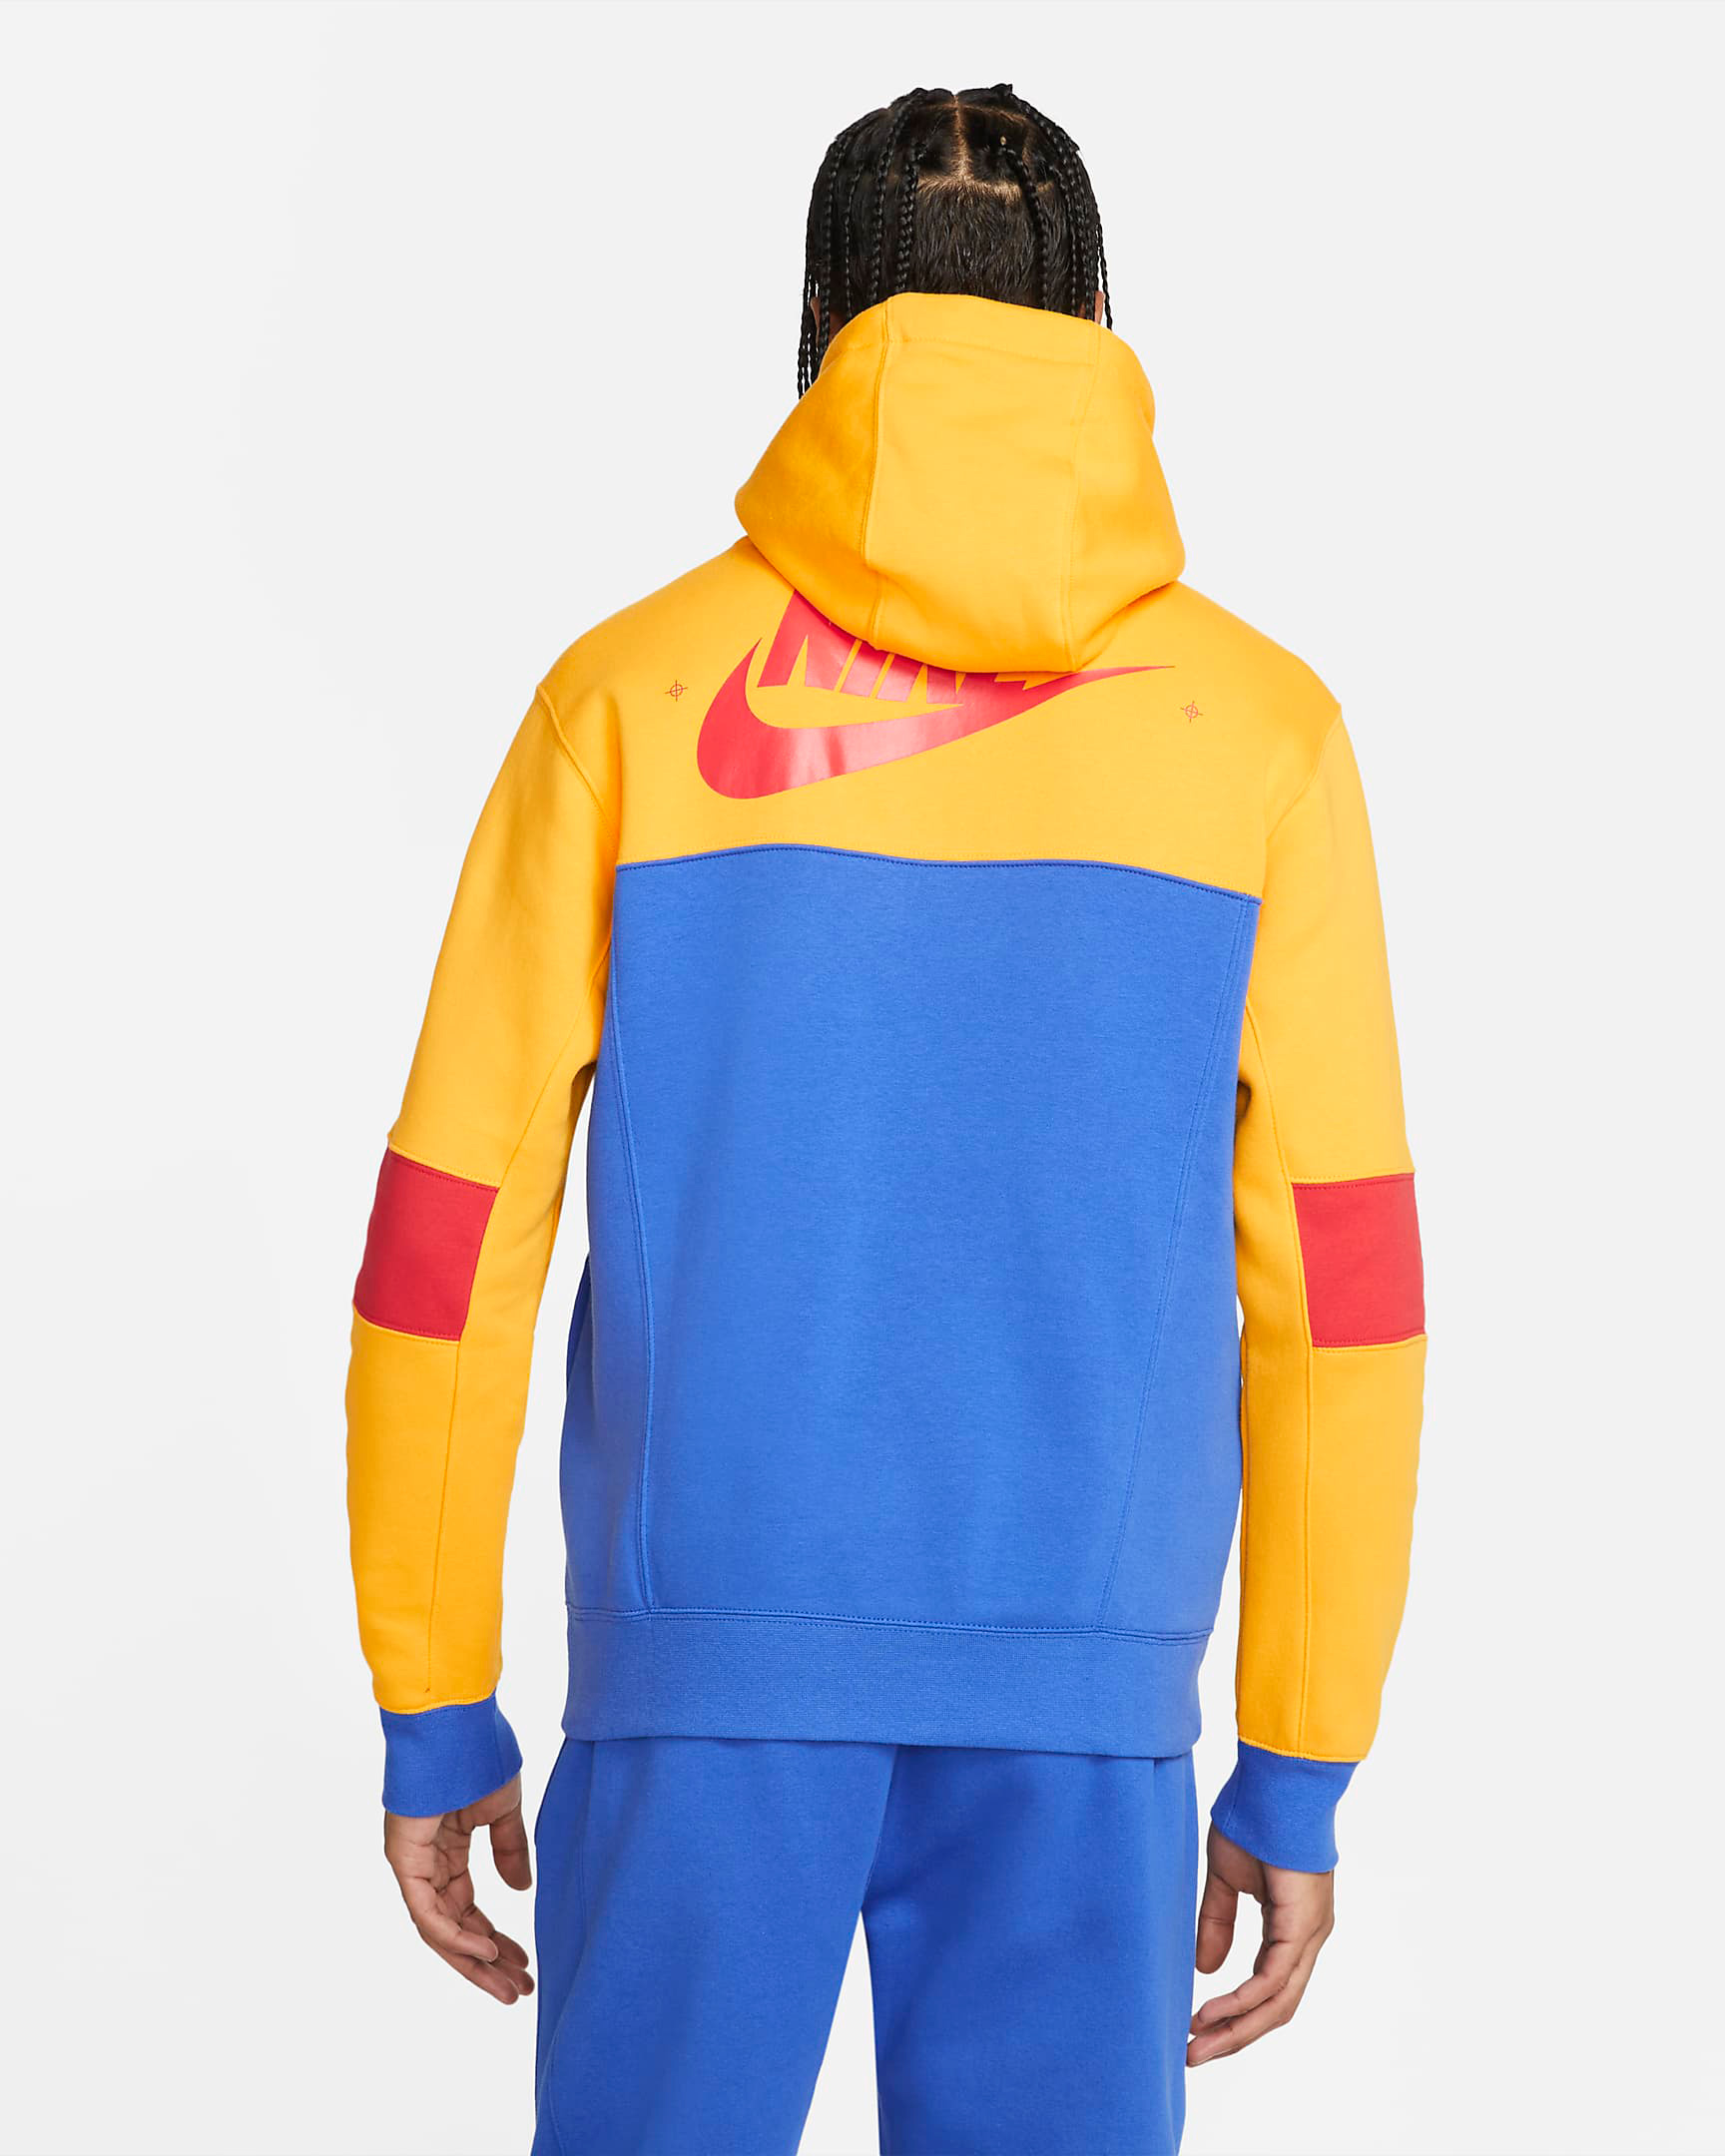 nike-alter-and-reveal-hoodie-yellow-blue-red-2